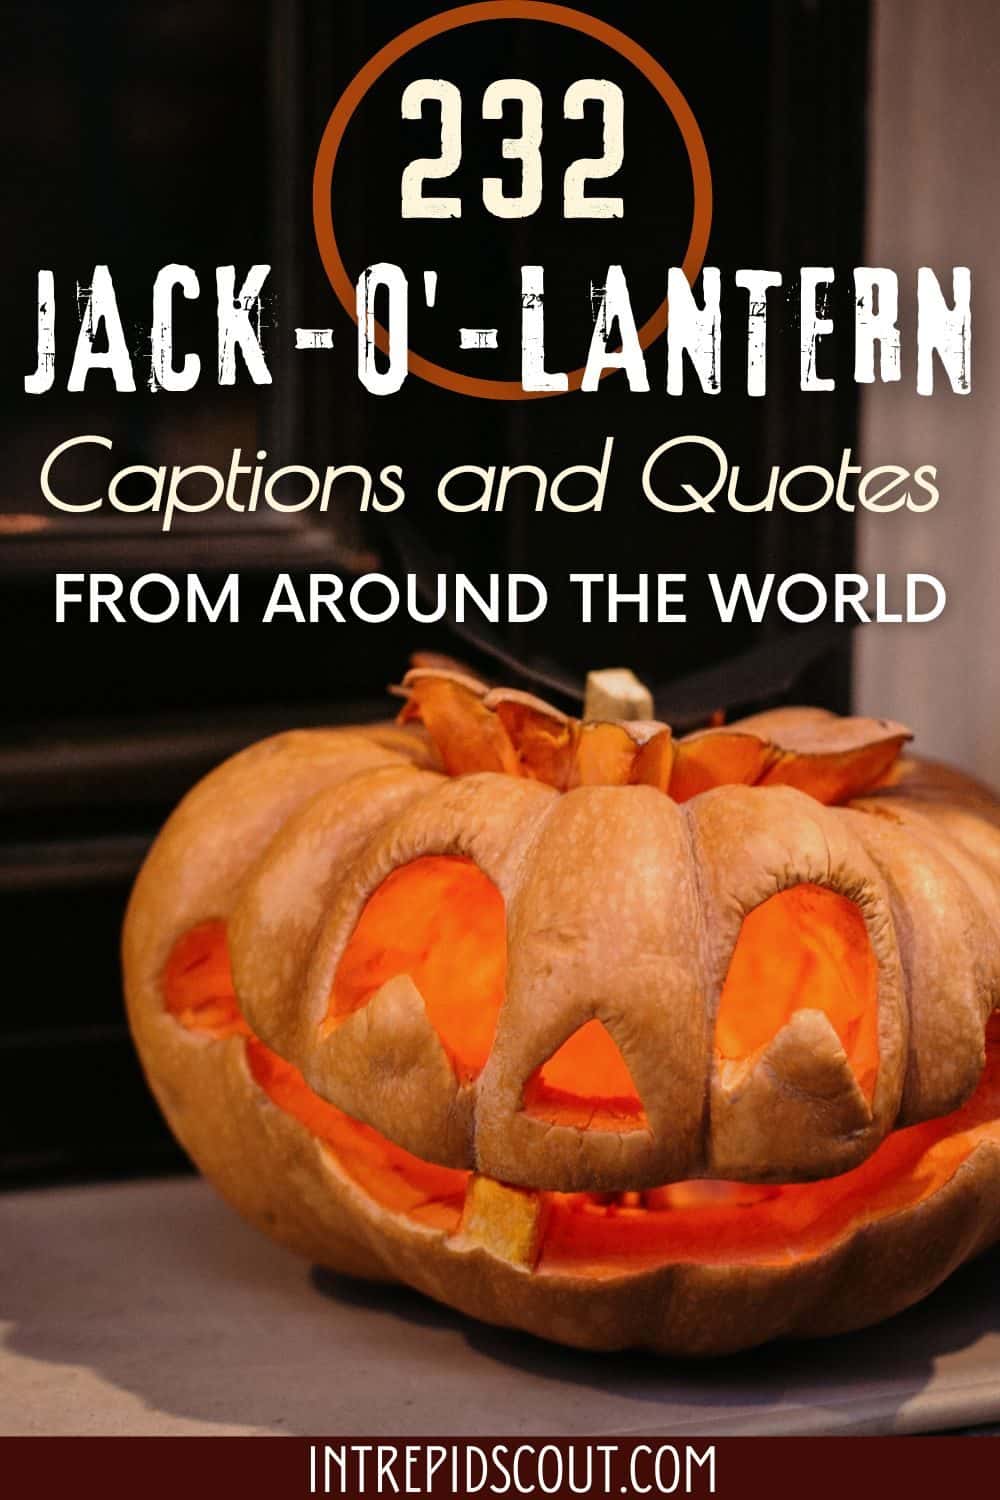 Jack-o-lantern captions and quotes